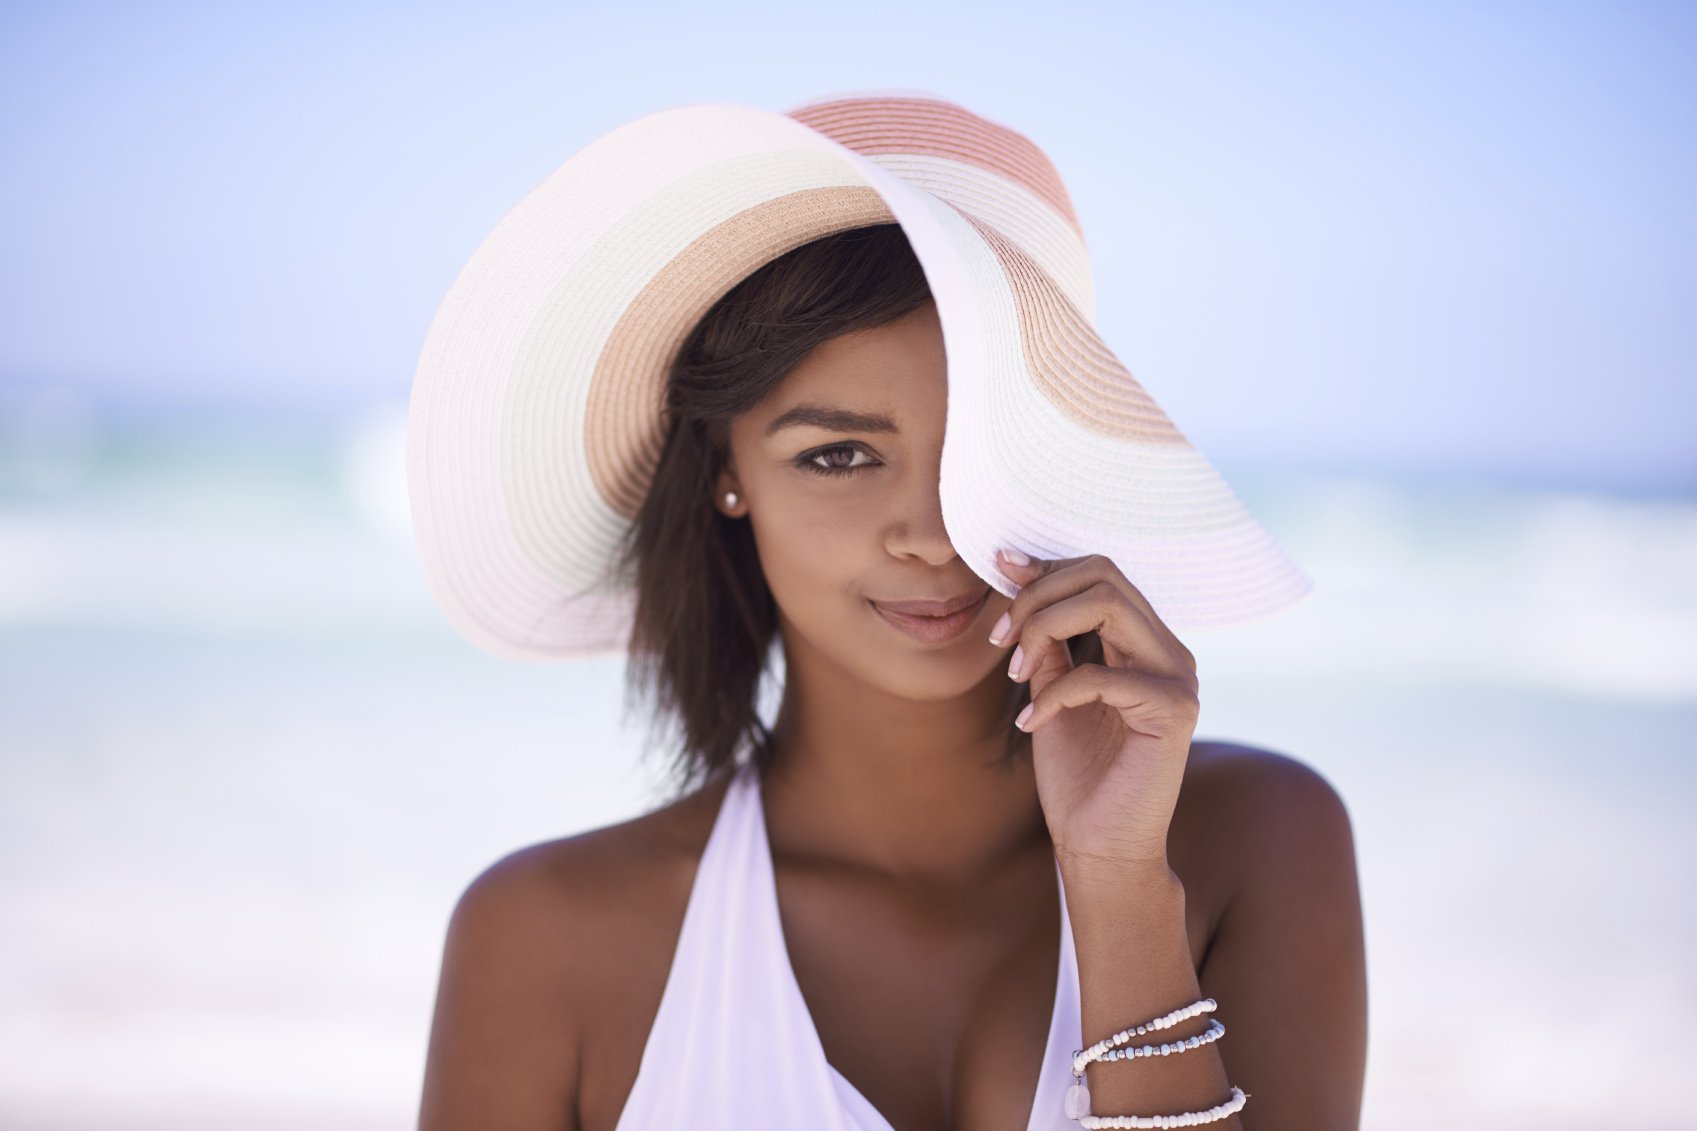 sun hats are a great way to protect yourself from skin cancer